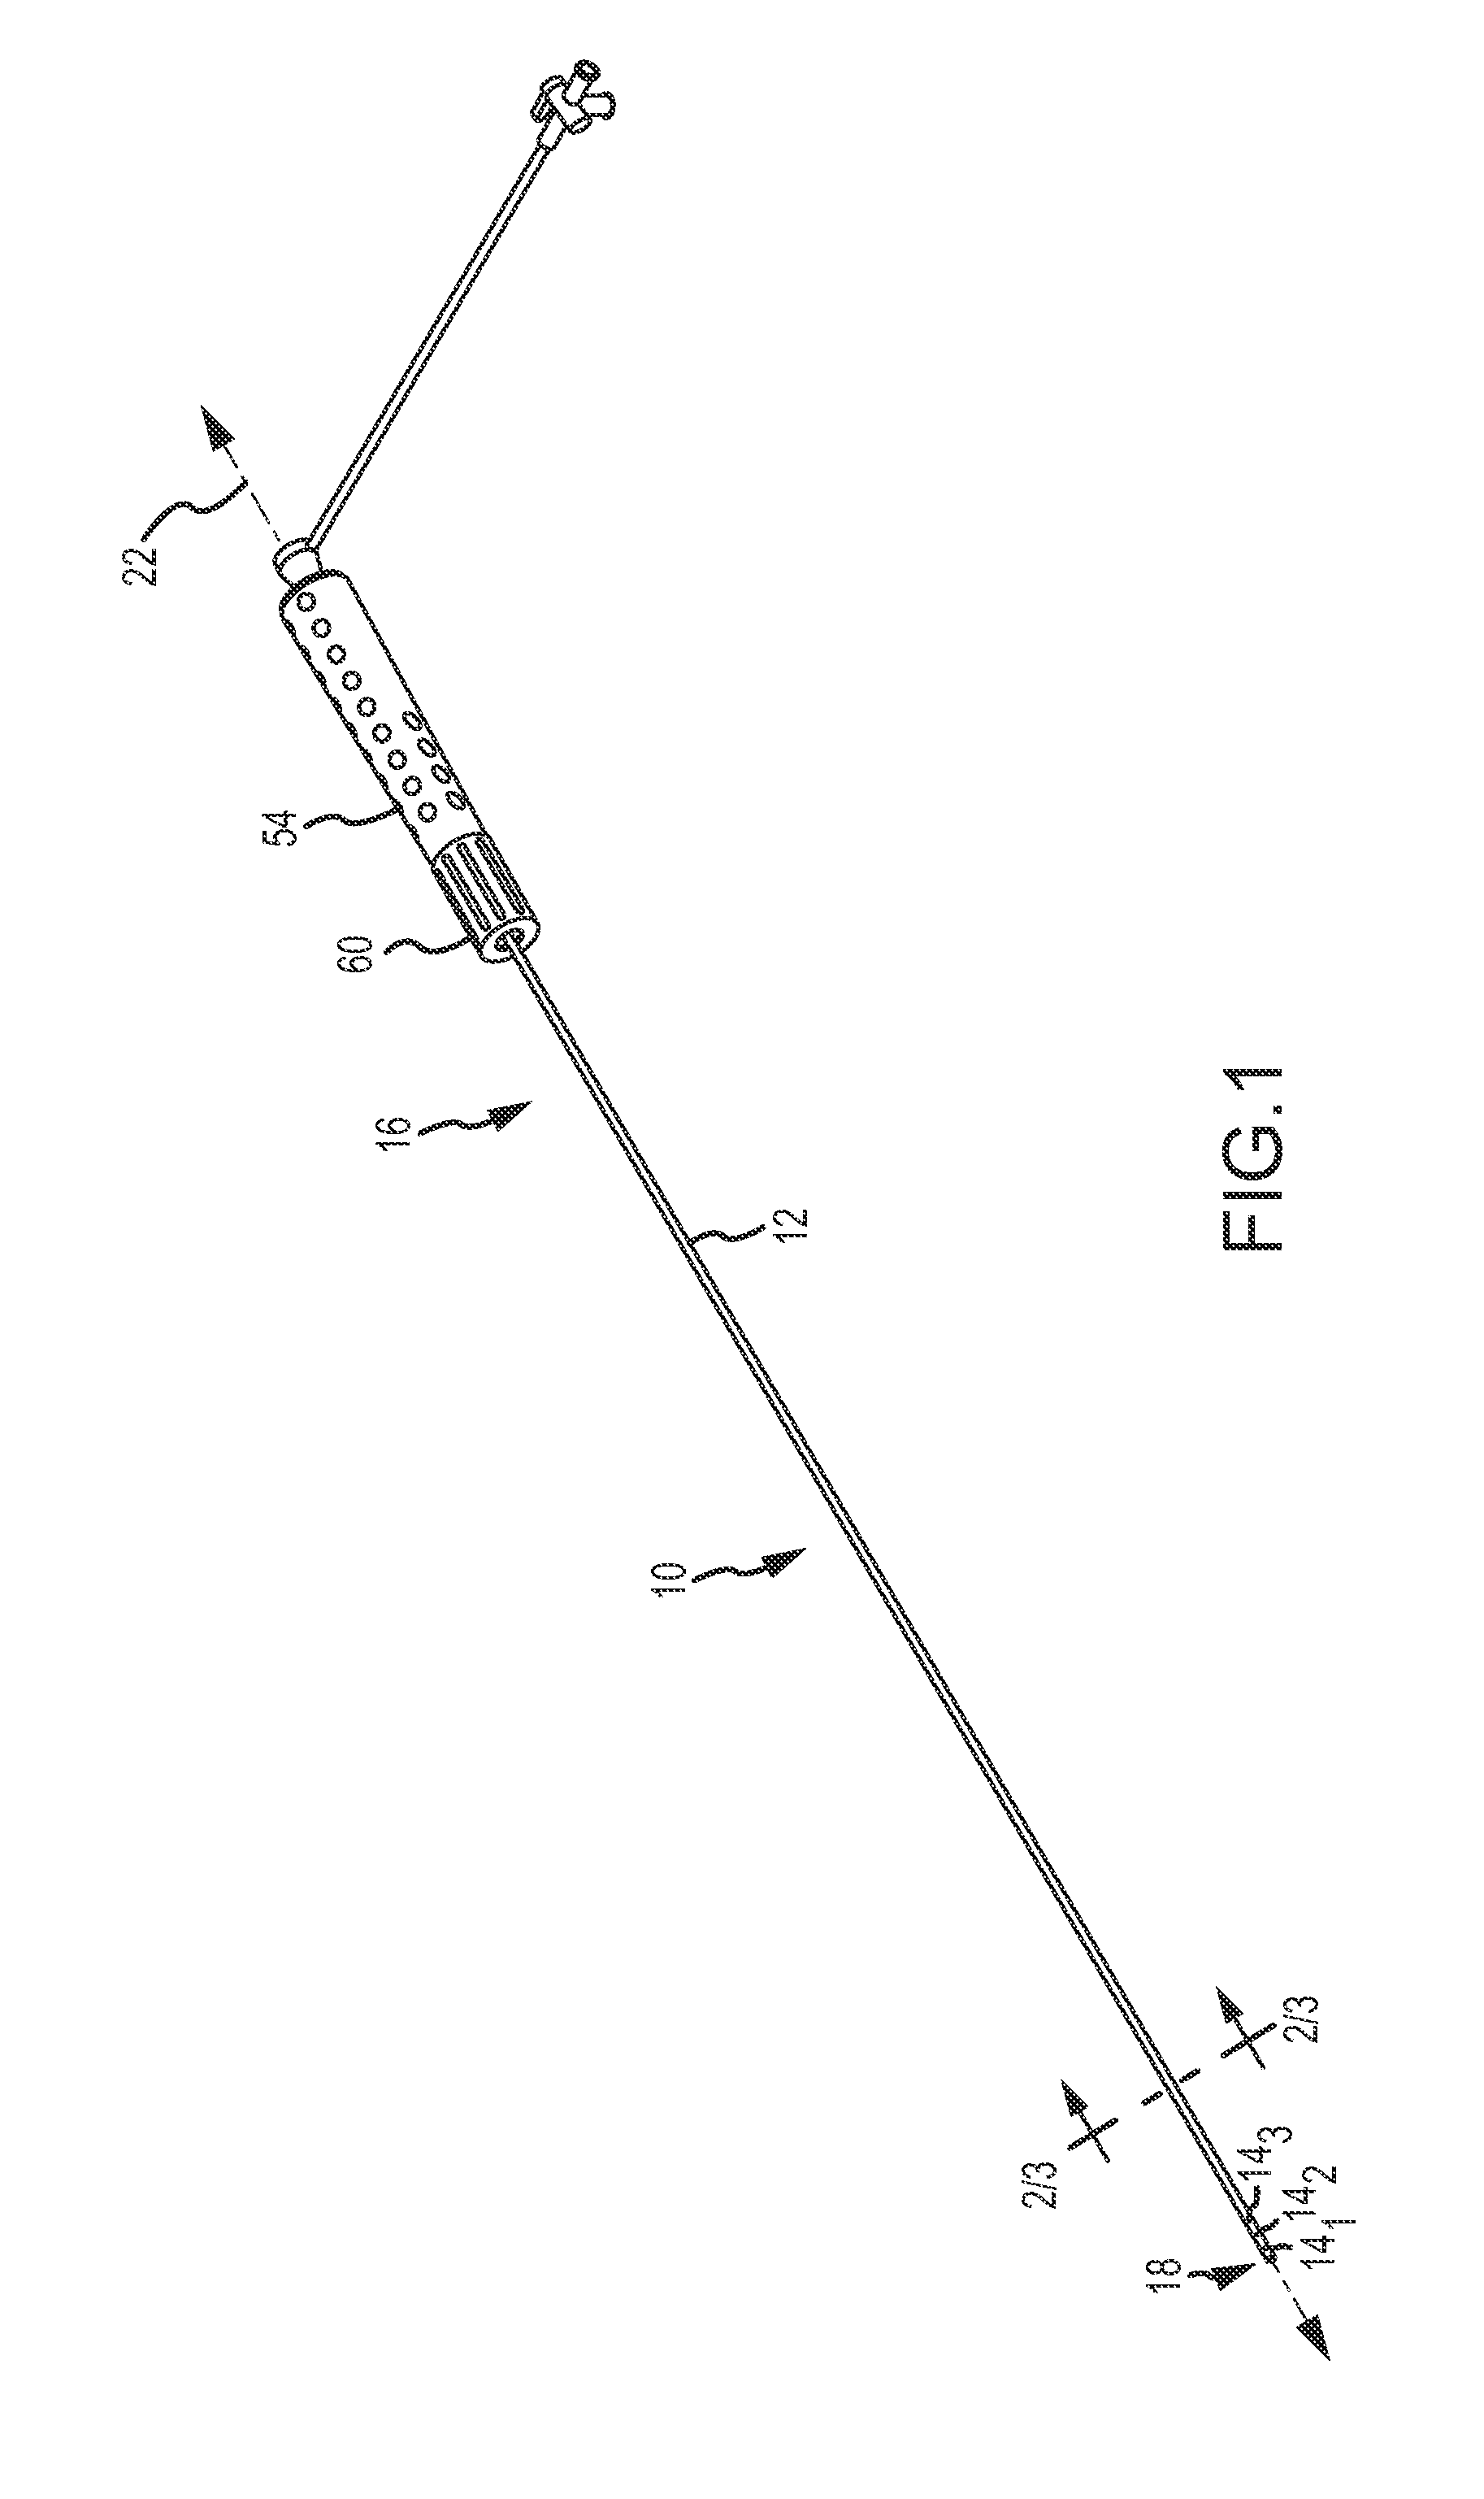 Medical devices having electrodes mounted thereon and methods of manufacturing therefor